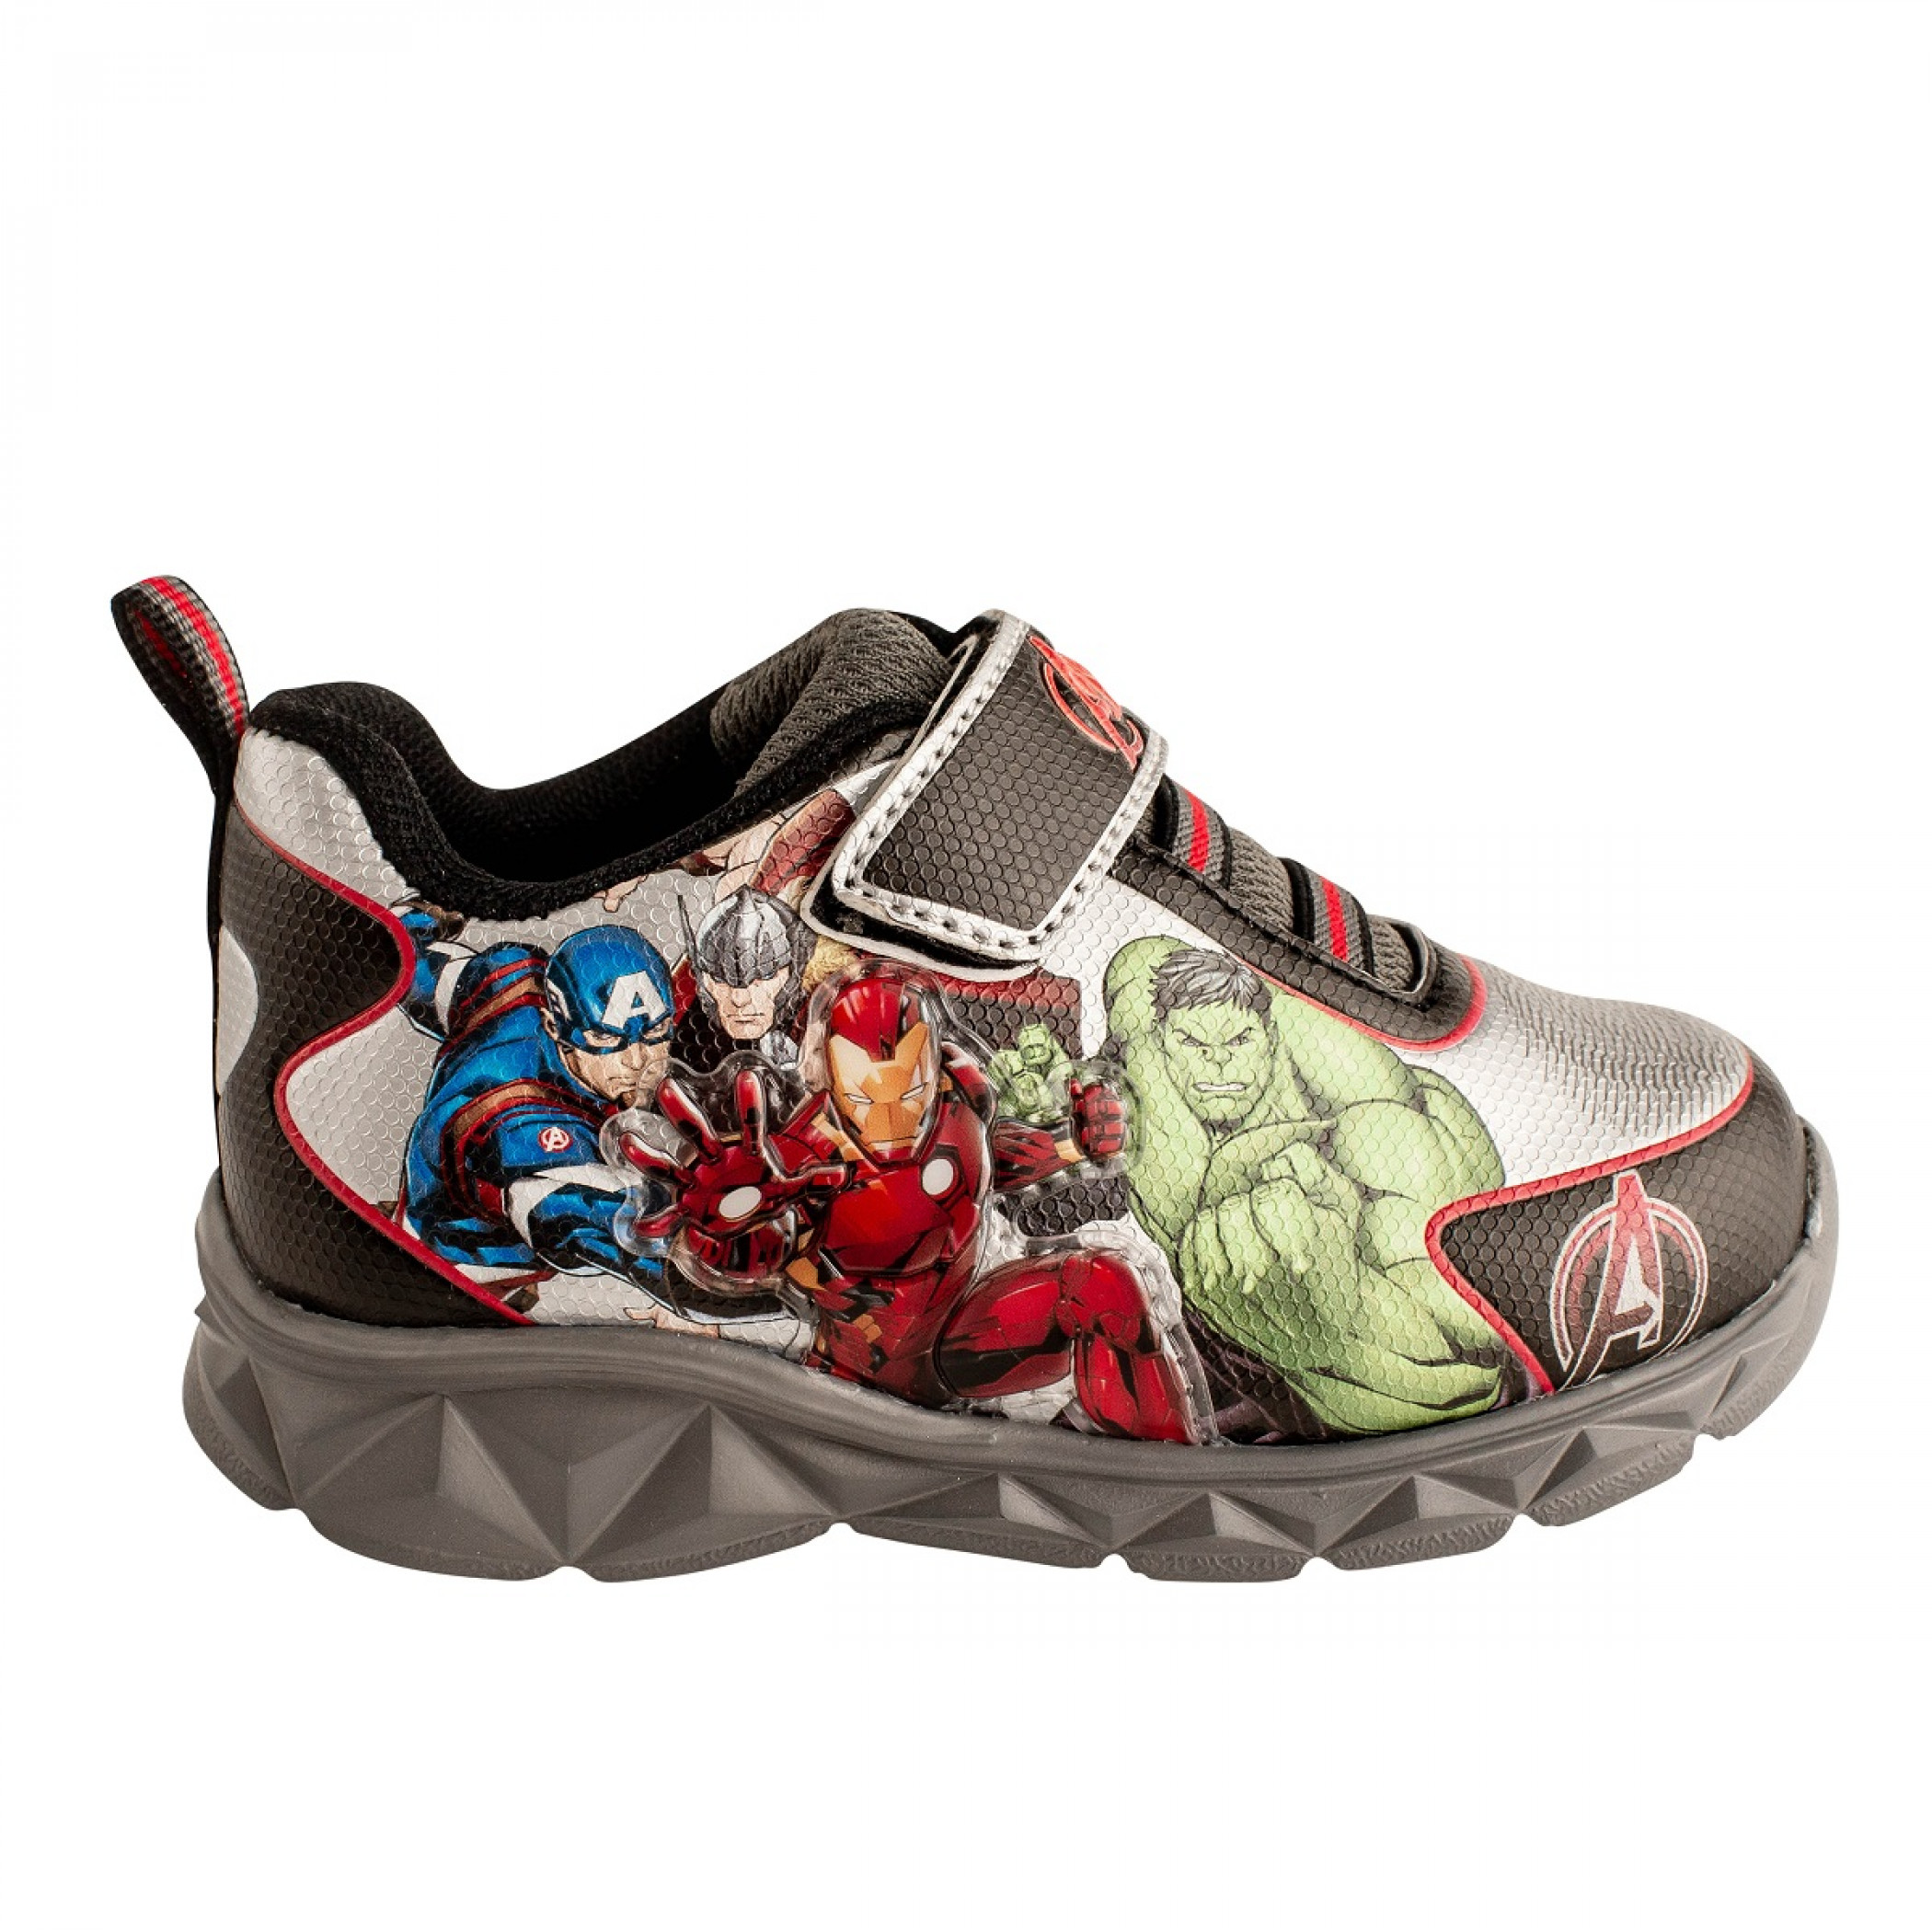 Avengers Heroes Stance Kids Light Up Shoes